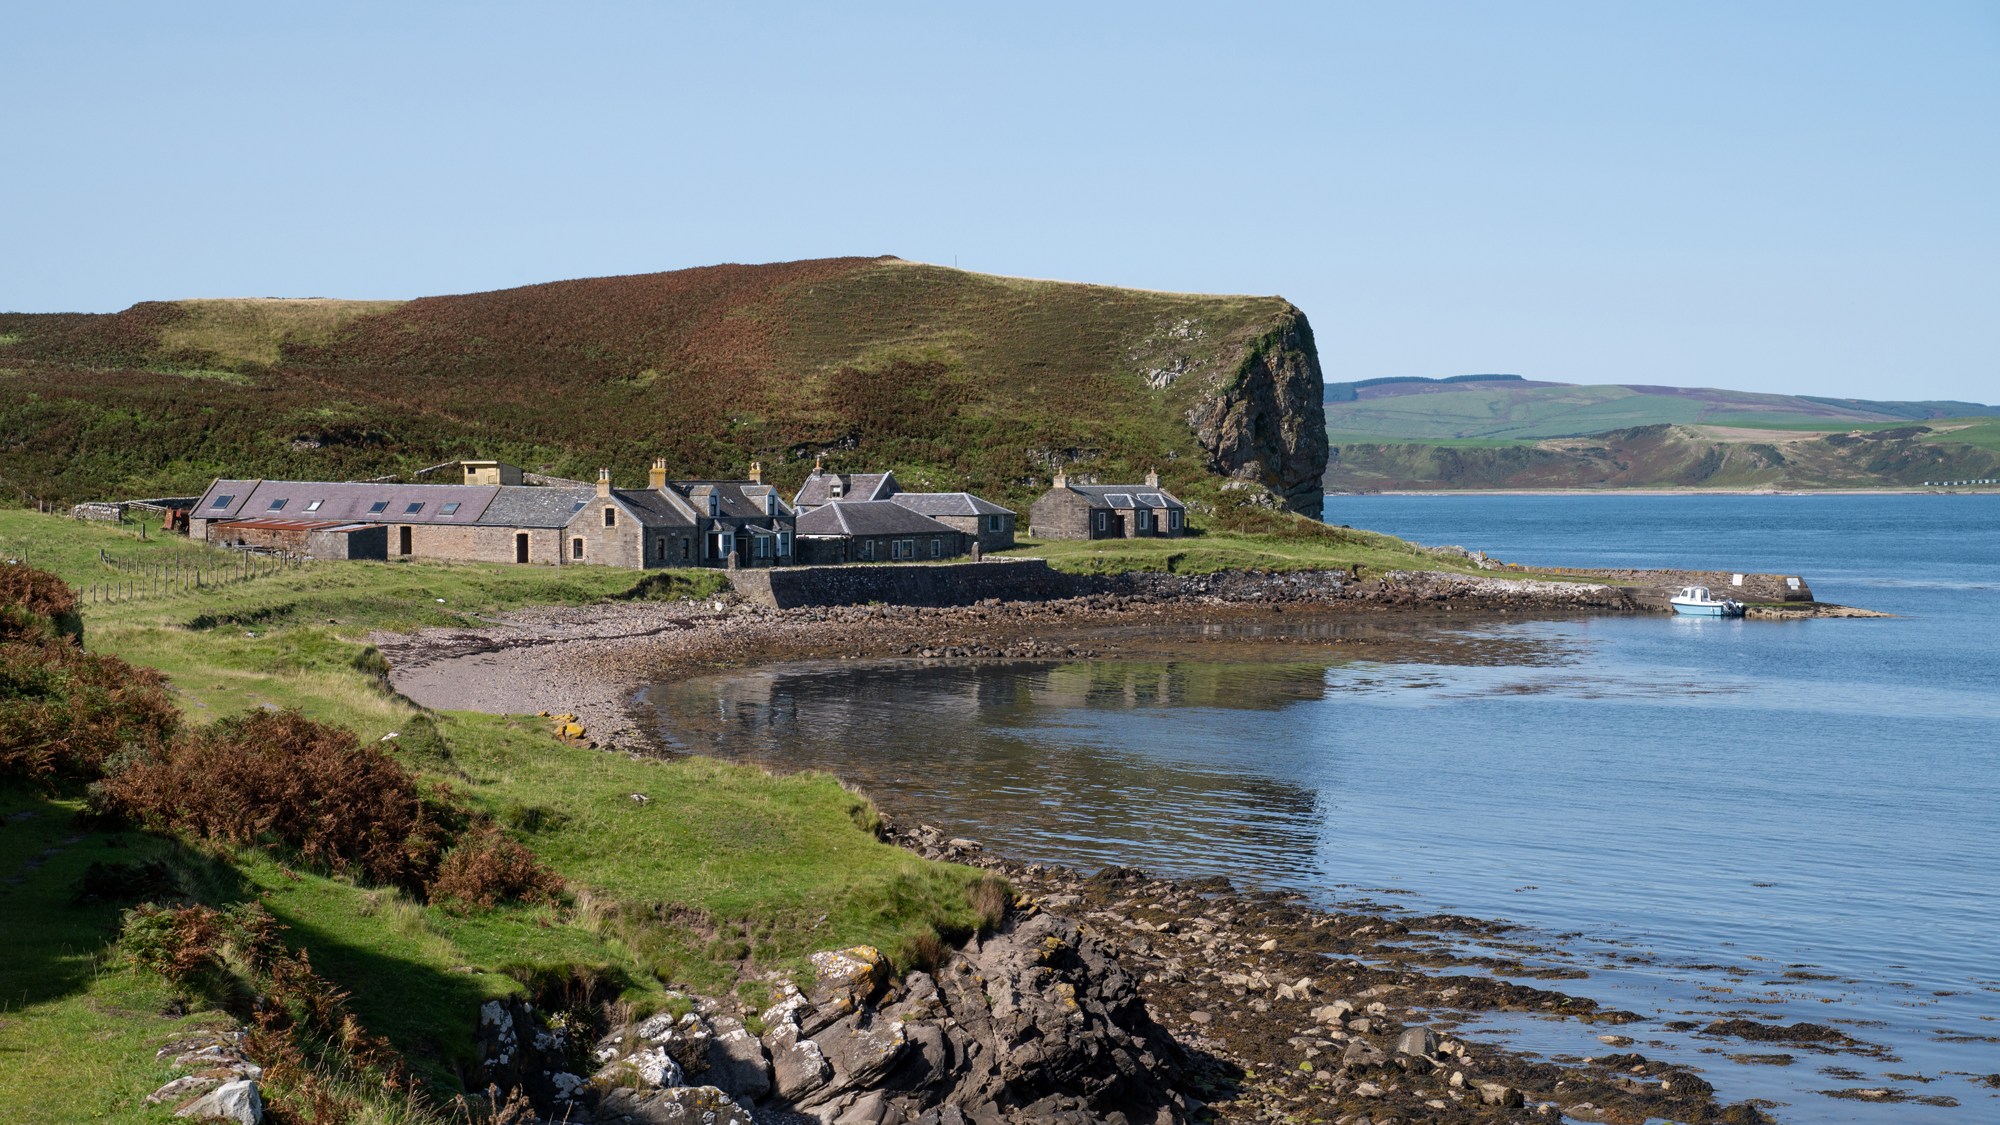 Access to Sanda Island, off the Kintyre peninsula, is by private boat or helicopter only